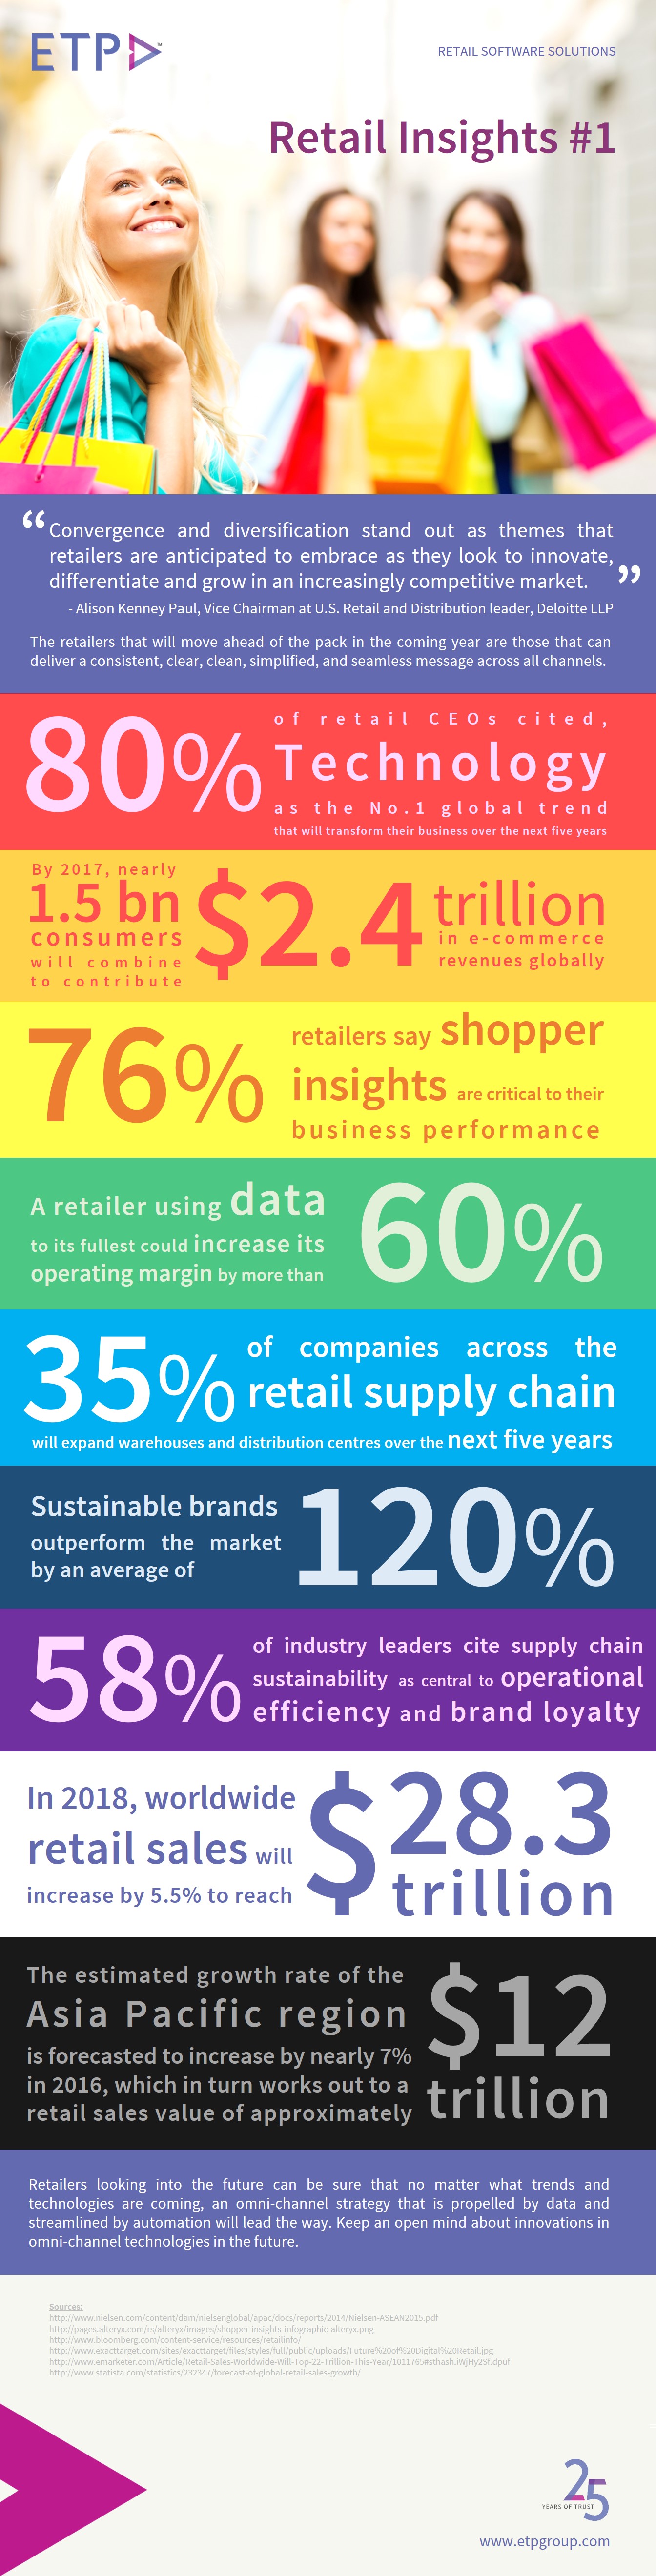 ETP blog retail-insights-infographic